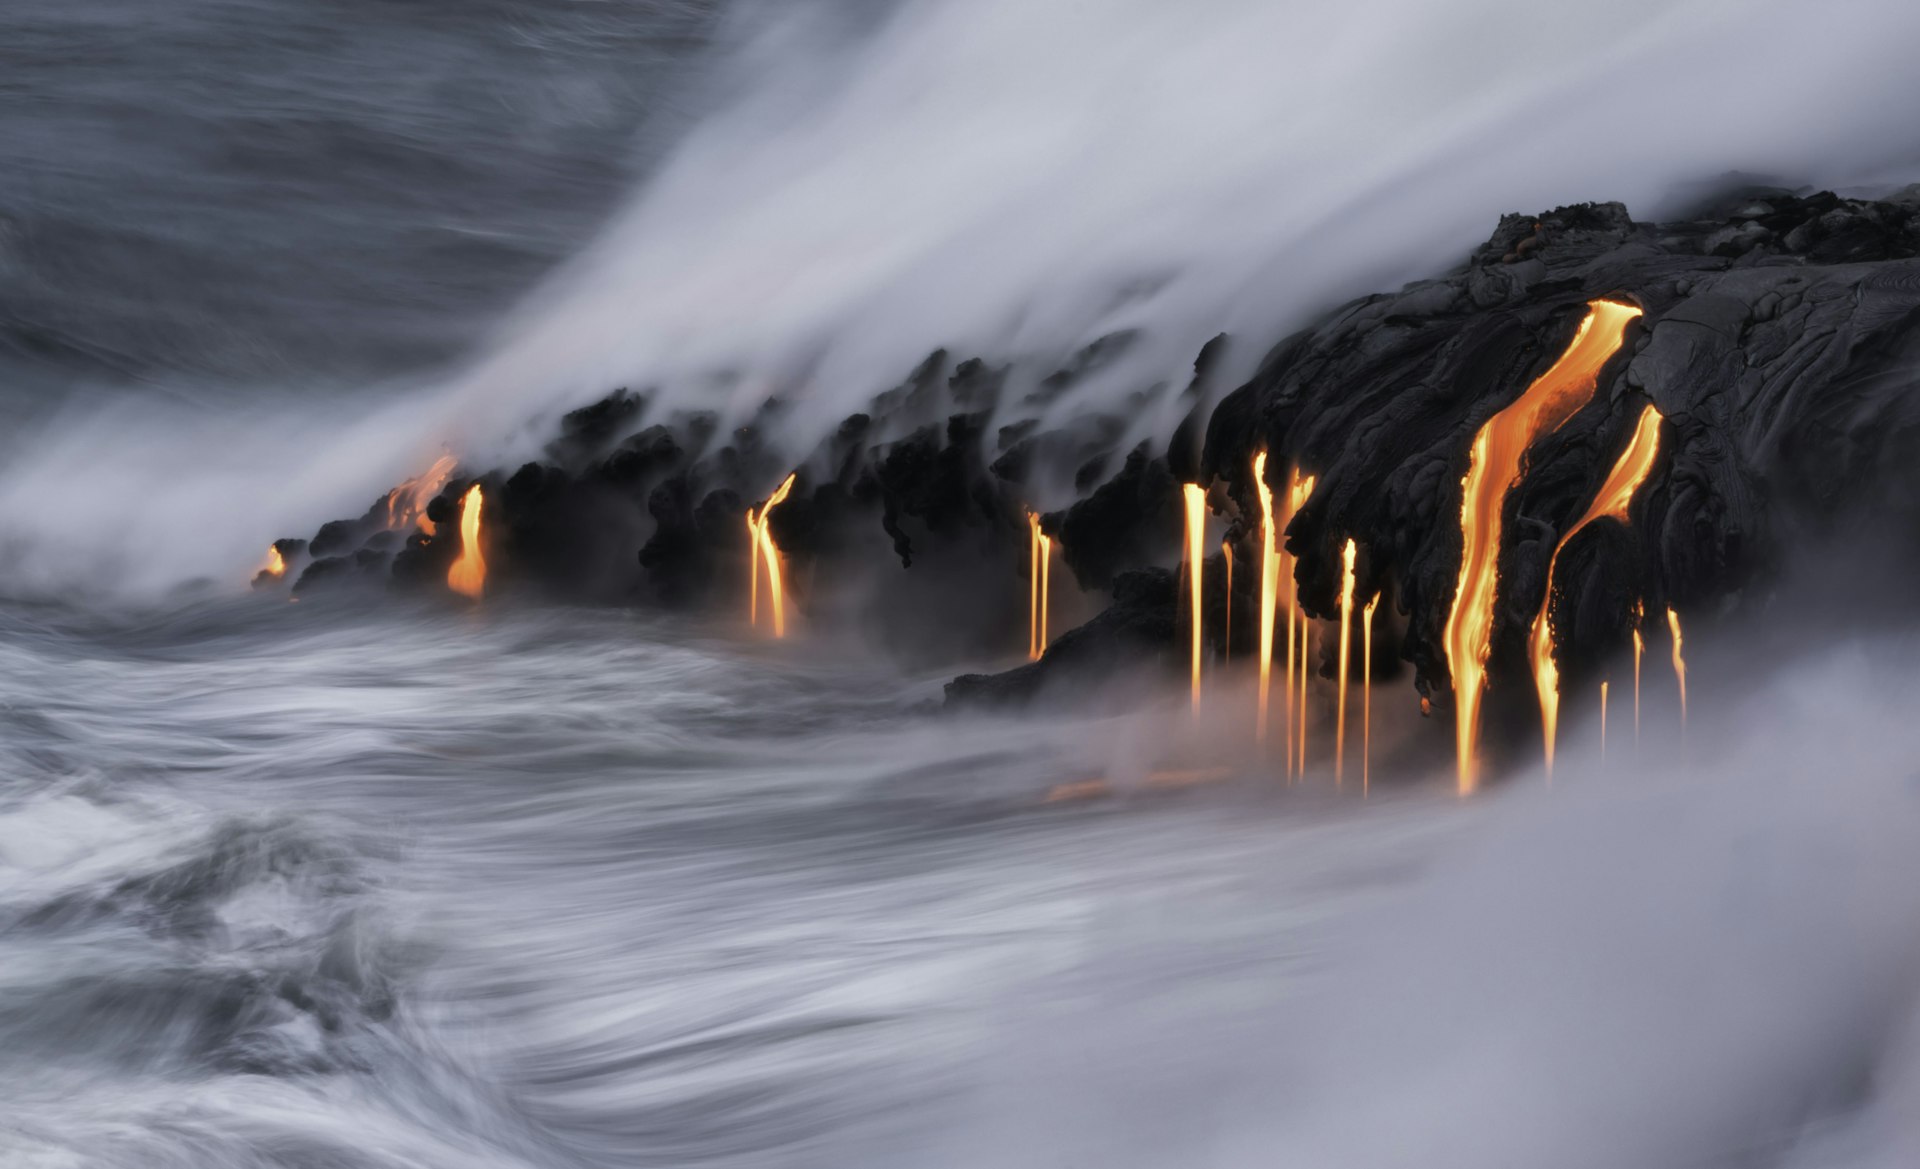 red lava drips into the ocean from a dark rock